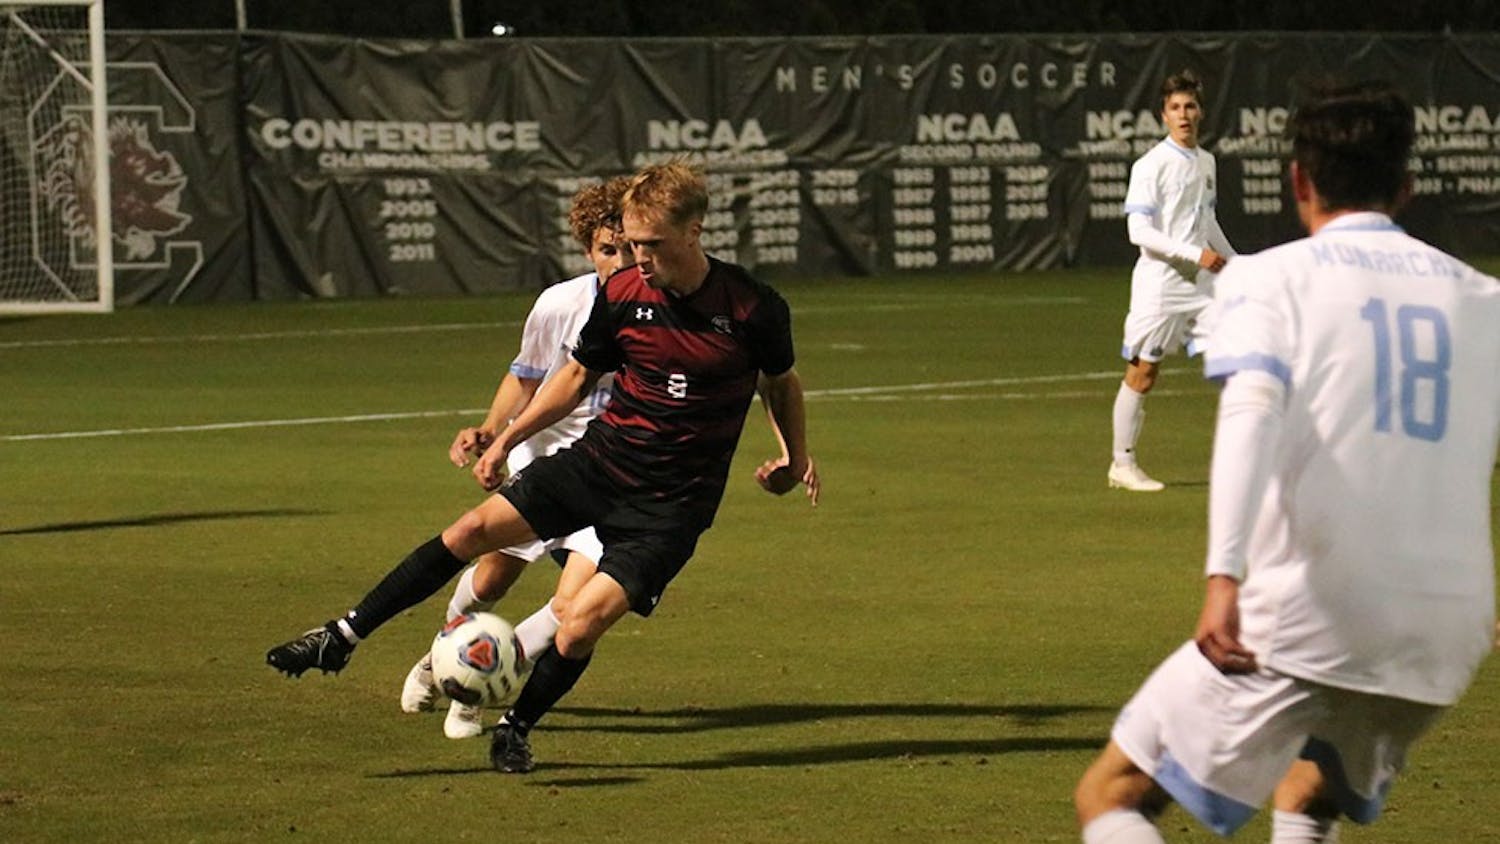 Graduate midfielder Jared Gulden keeps possession to head toward the goal against Old Dominion on Nov. 5. The Gamecocks lost 3-2 to the Monarchs in their last regular season game of the year.